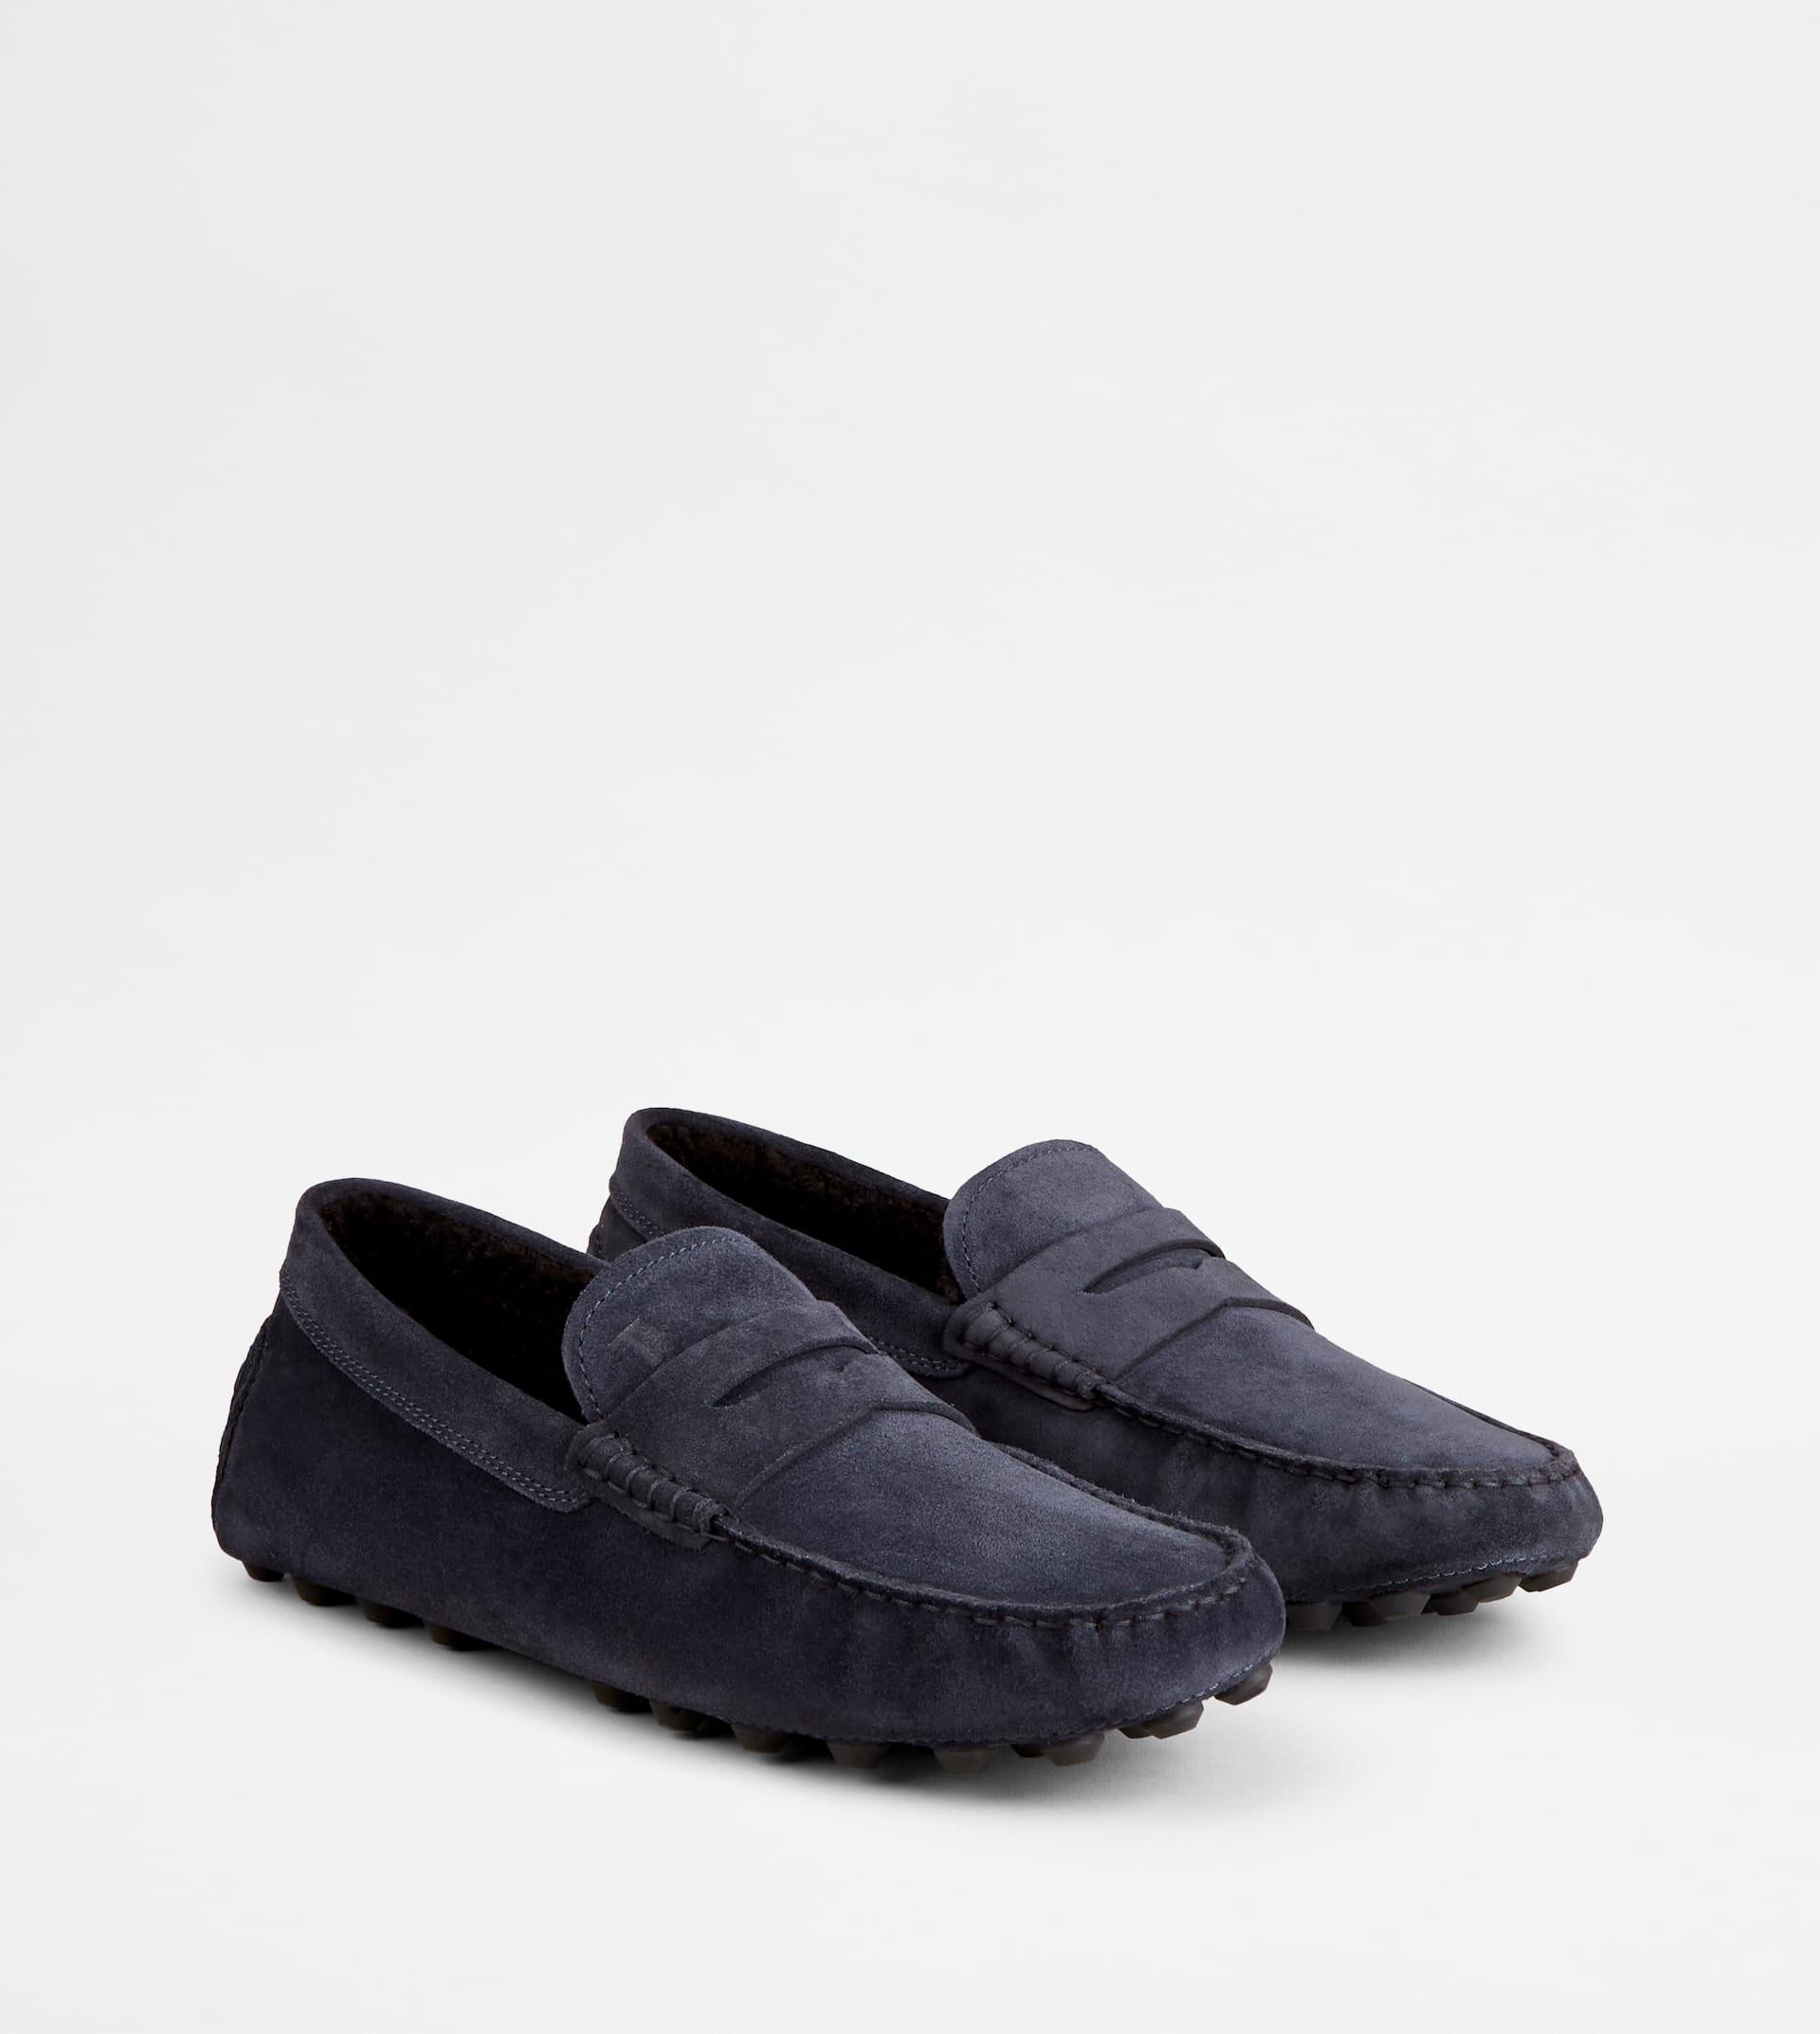 TOD'S GOMMINO BUBBLE IN SUEDE - FURRY LINING - BLUE - 3